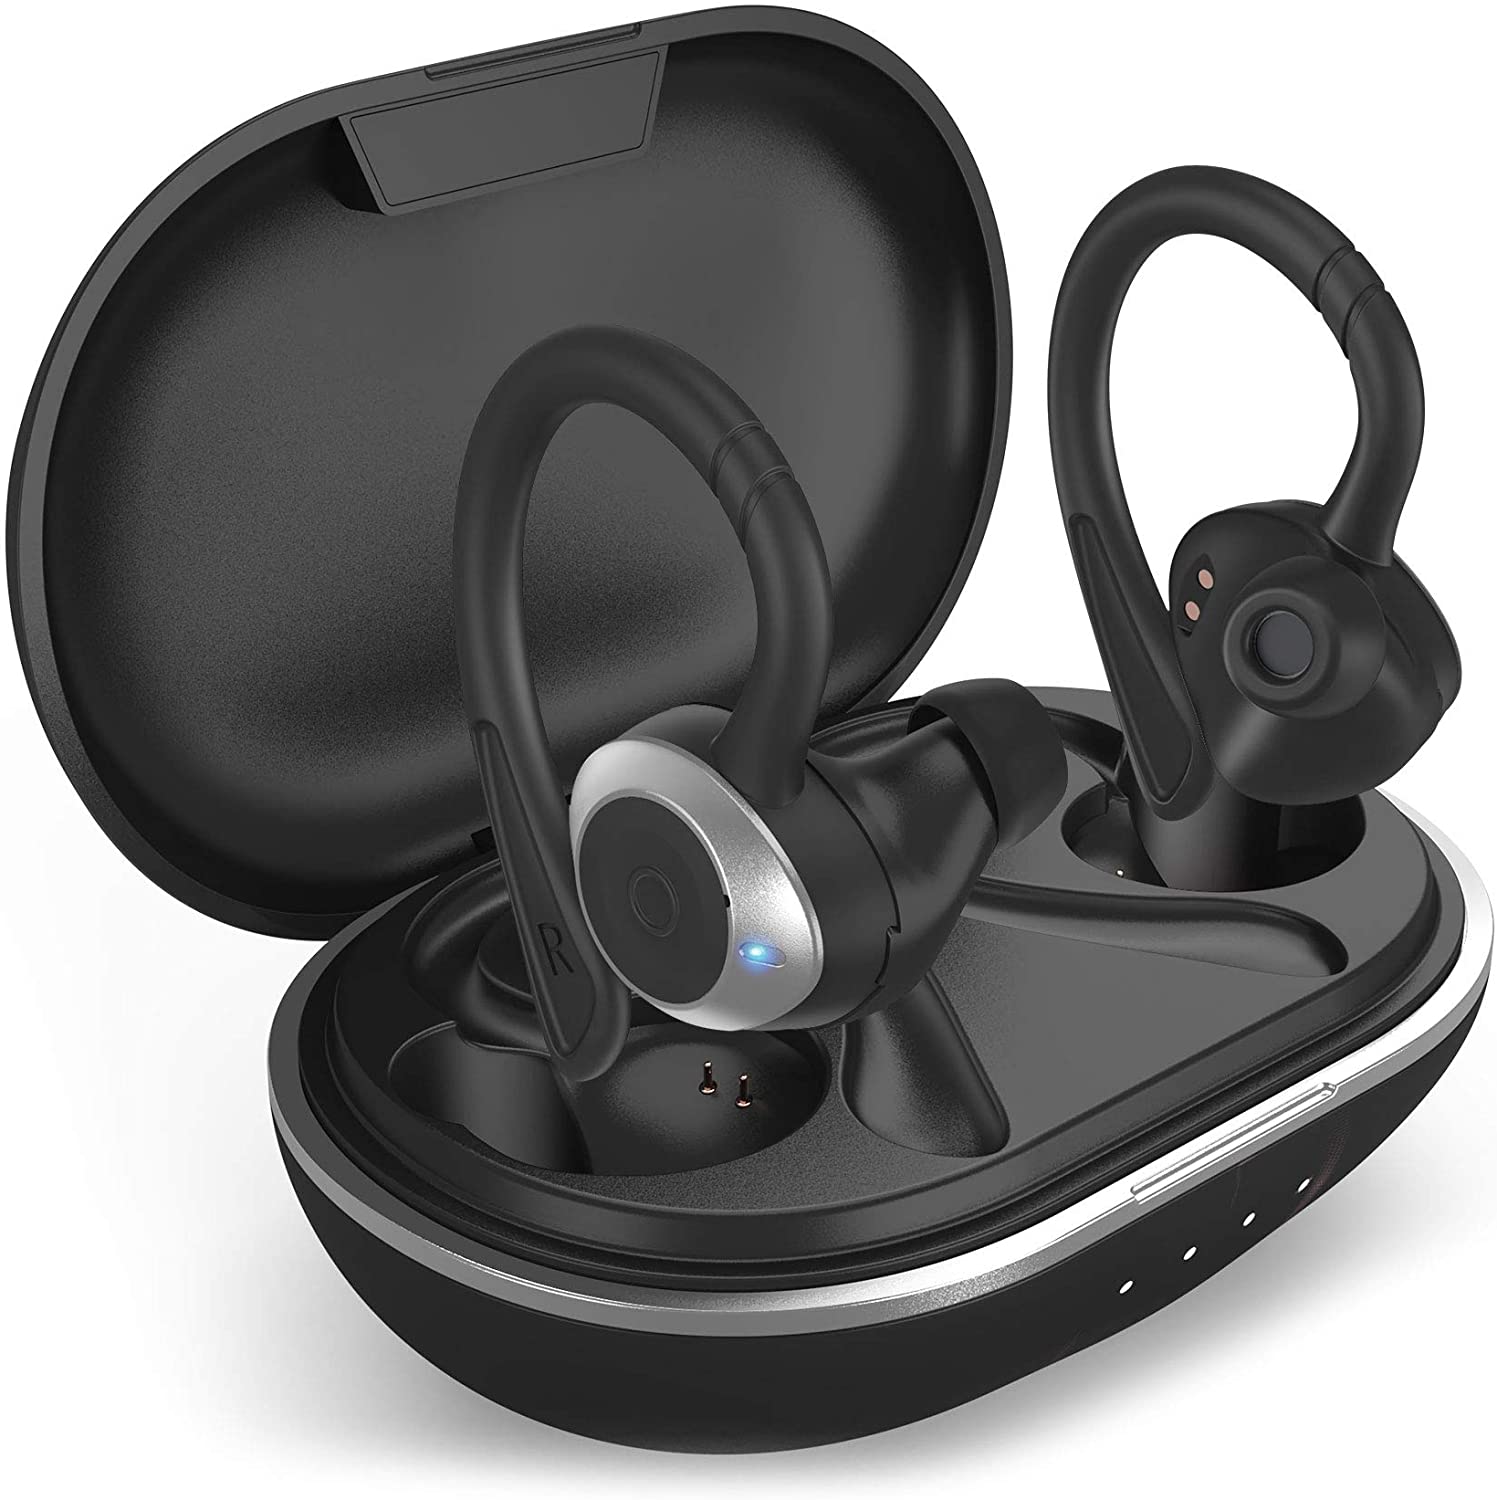 Black in-Ear Headphones Waterproof for Sport/Work Immersive Bass Sound Mic Wireless Earbuds Bluetooth 5.0 Earphones with Charging Case 24Hrs Playtime Headsets Compatible with iPhone/Android/PC